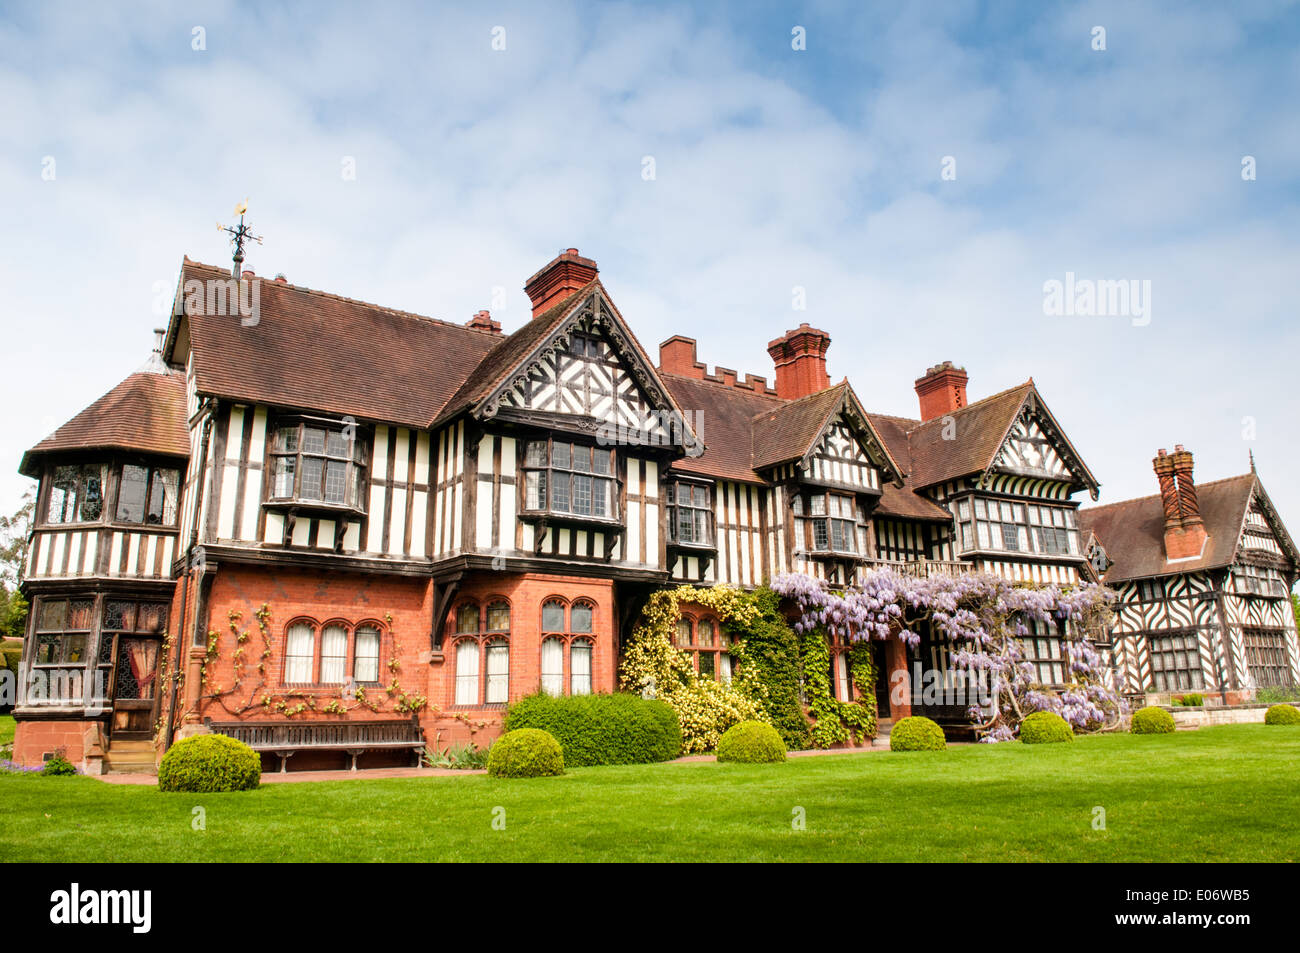 View of the stunning National Trust-owned Wightwick Manor, in Wolverhampton, with beautiful flowering wisteria covering windows Stock Photo